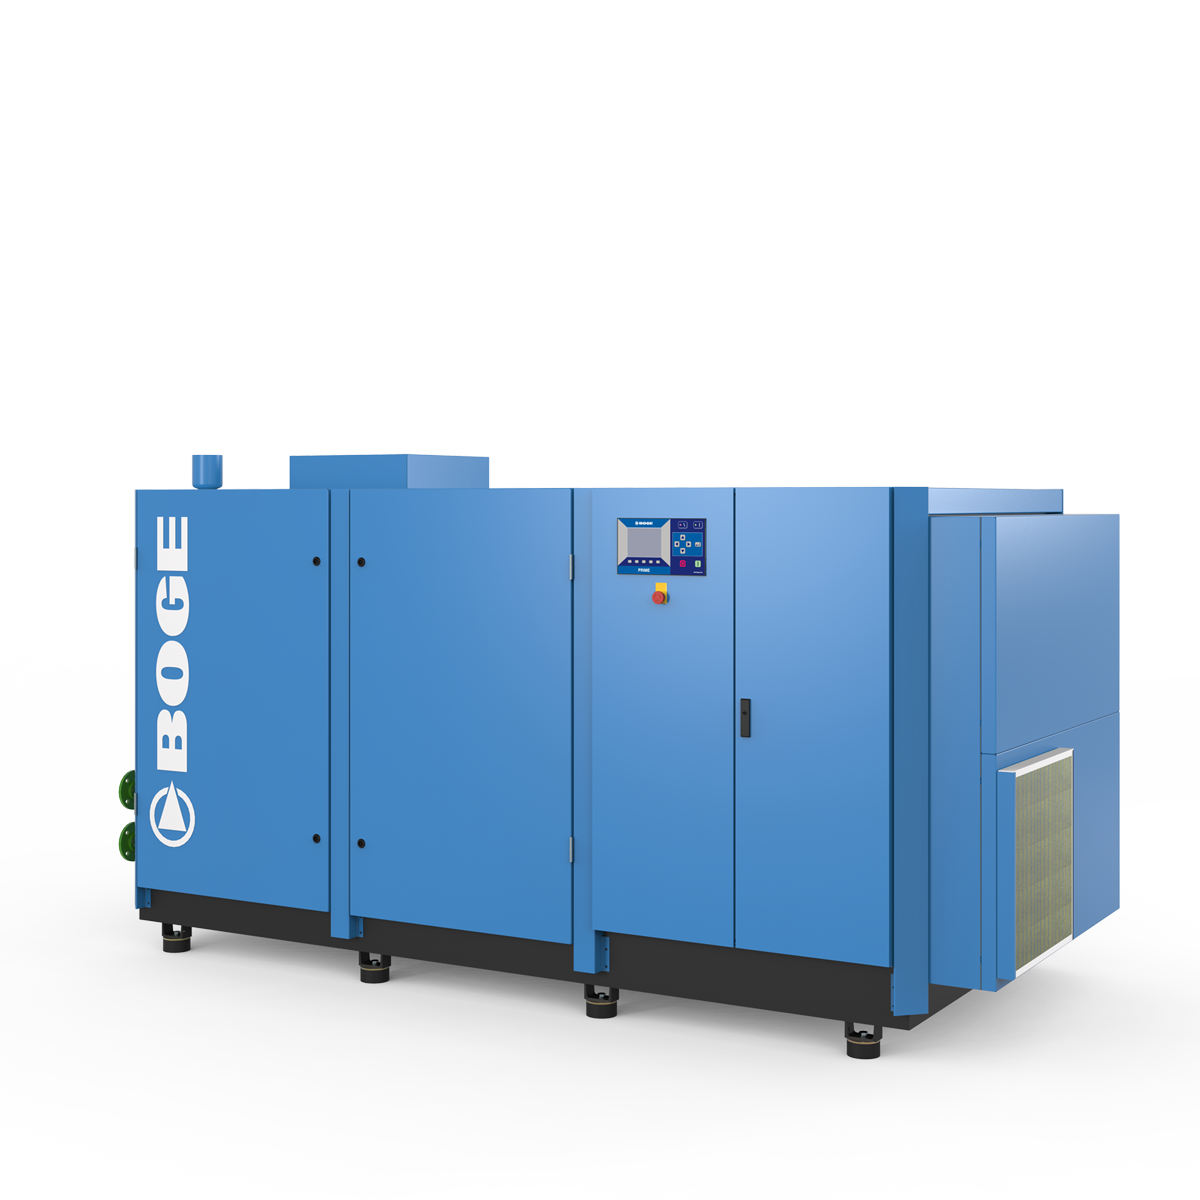 Screw Compressor SO Series up to 200 kW